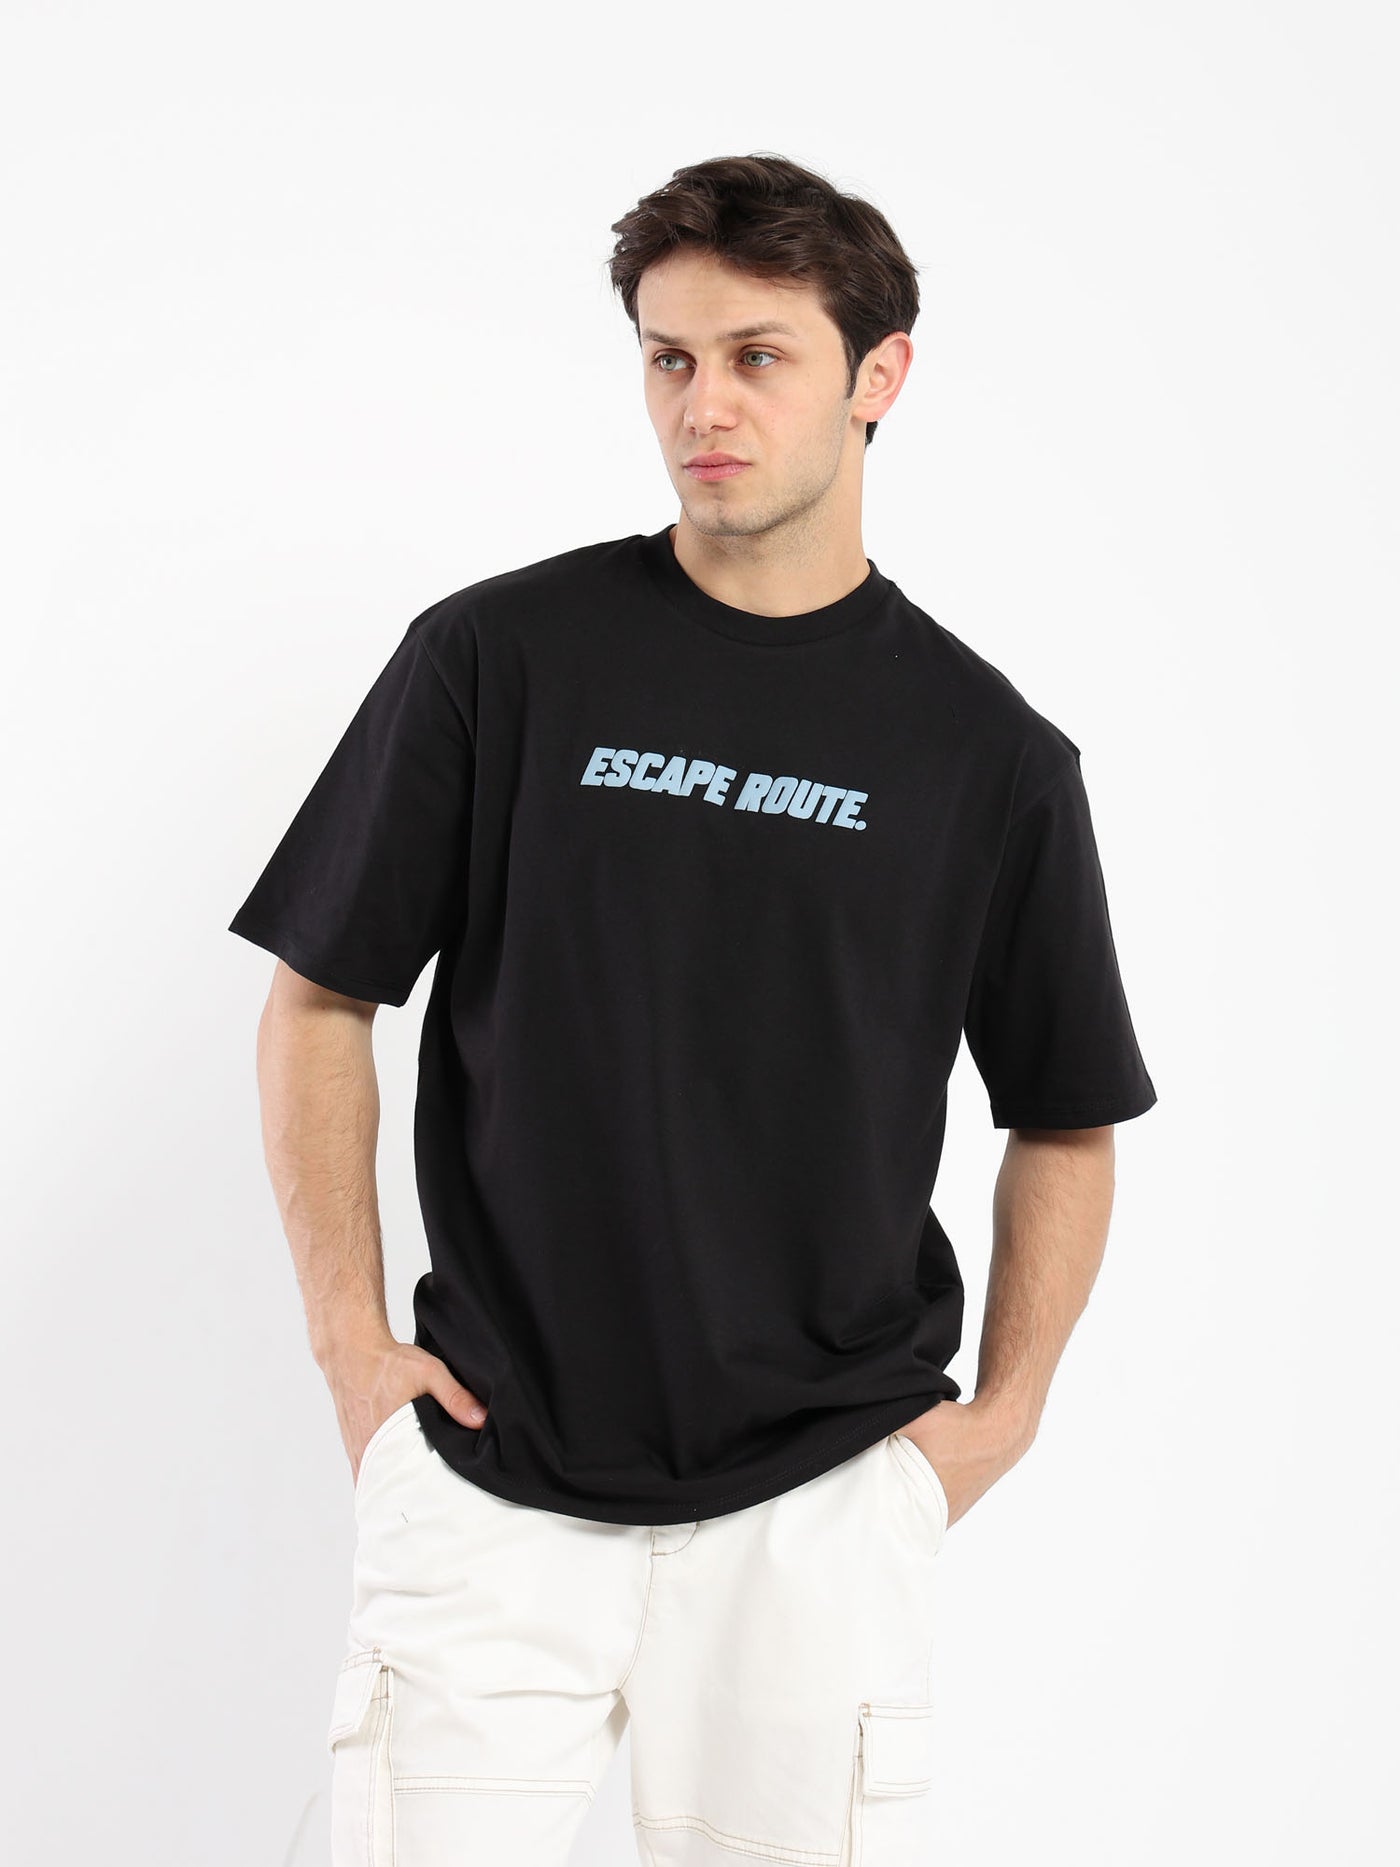 T-Shirt - Oversized - "Escape Route" Front and Back Print